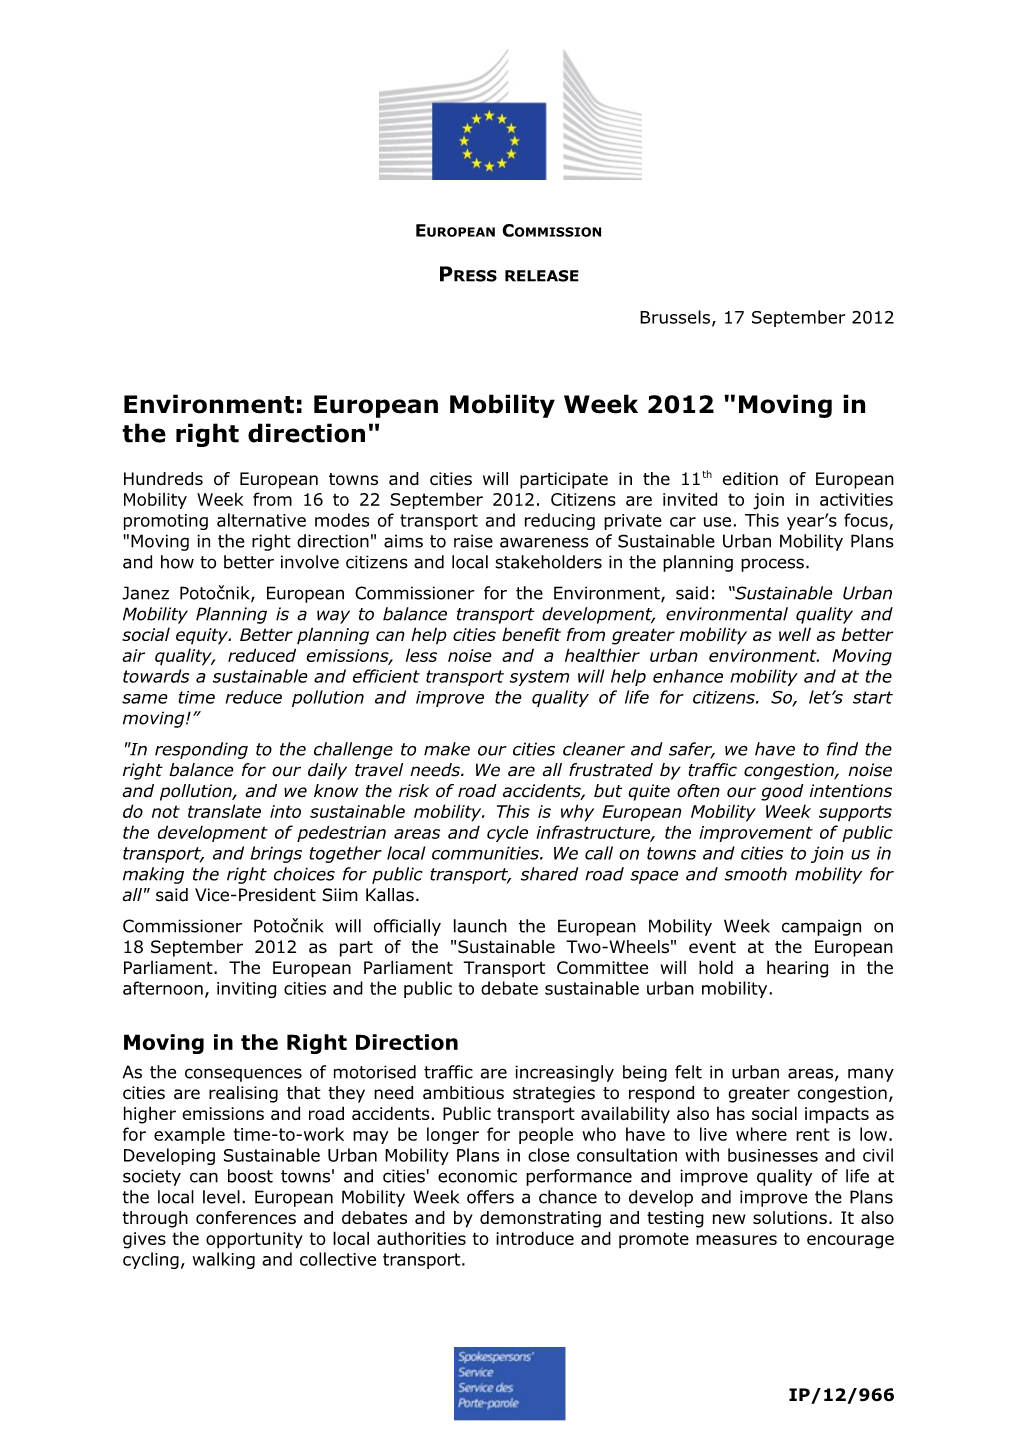 Environment: European Mobility Week 2012 Moving in the Right Direction